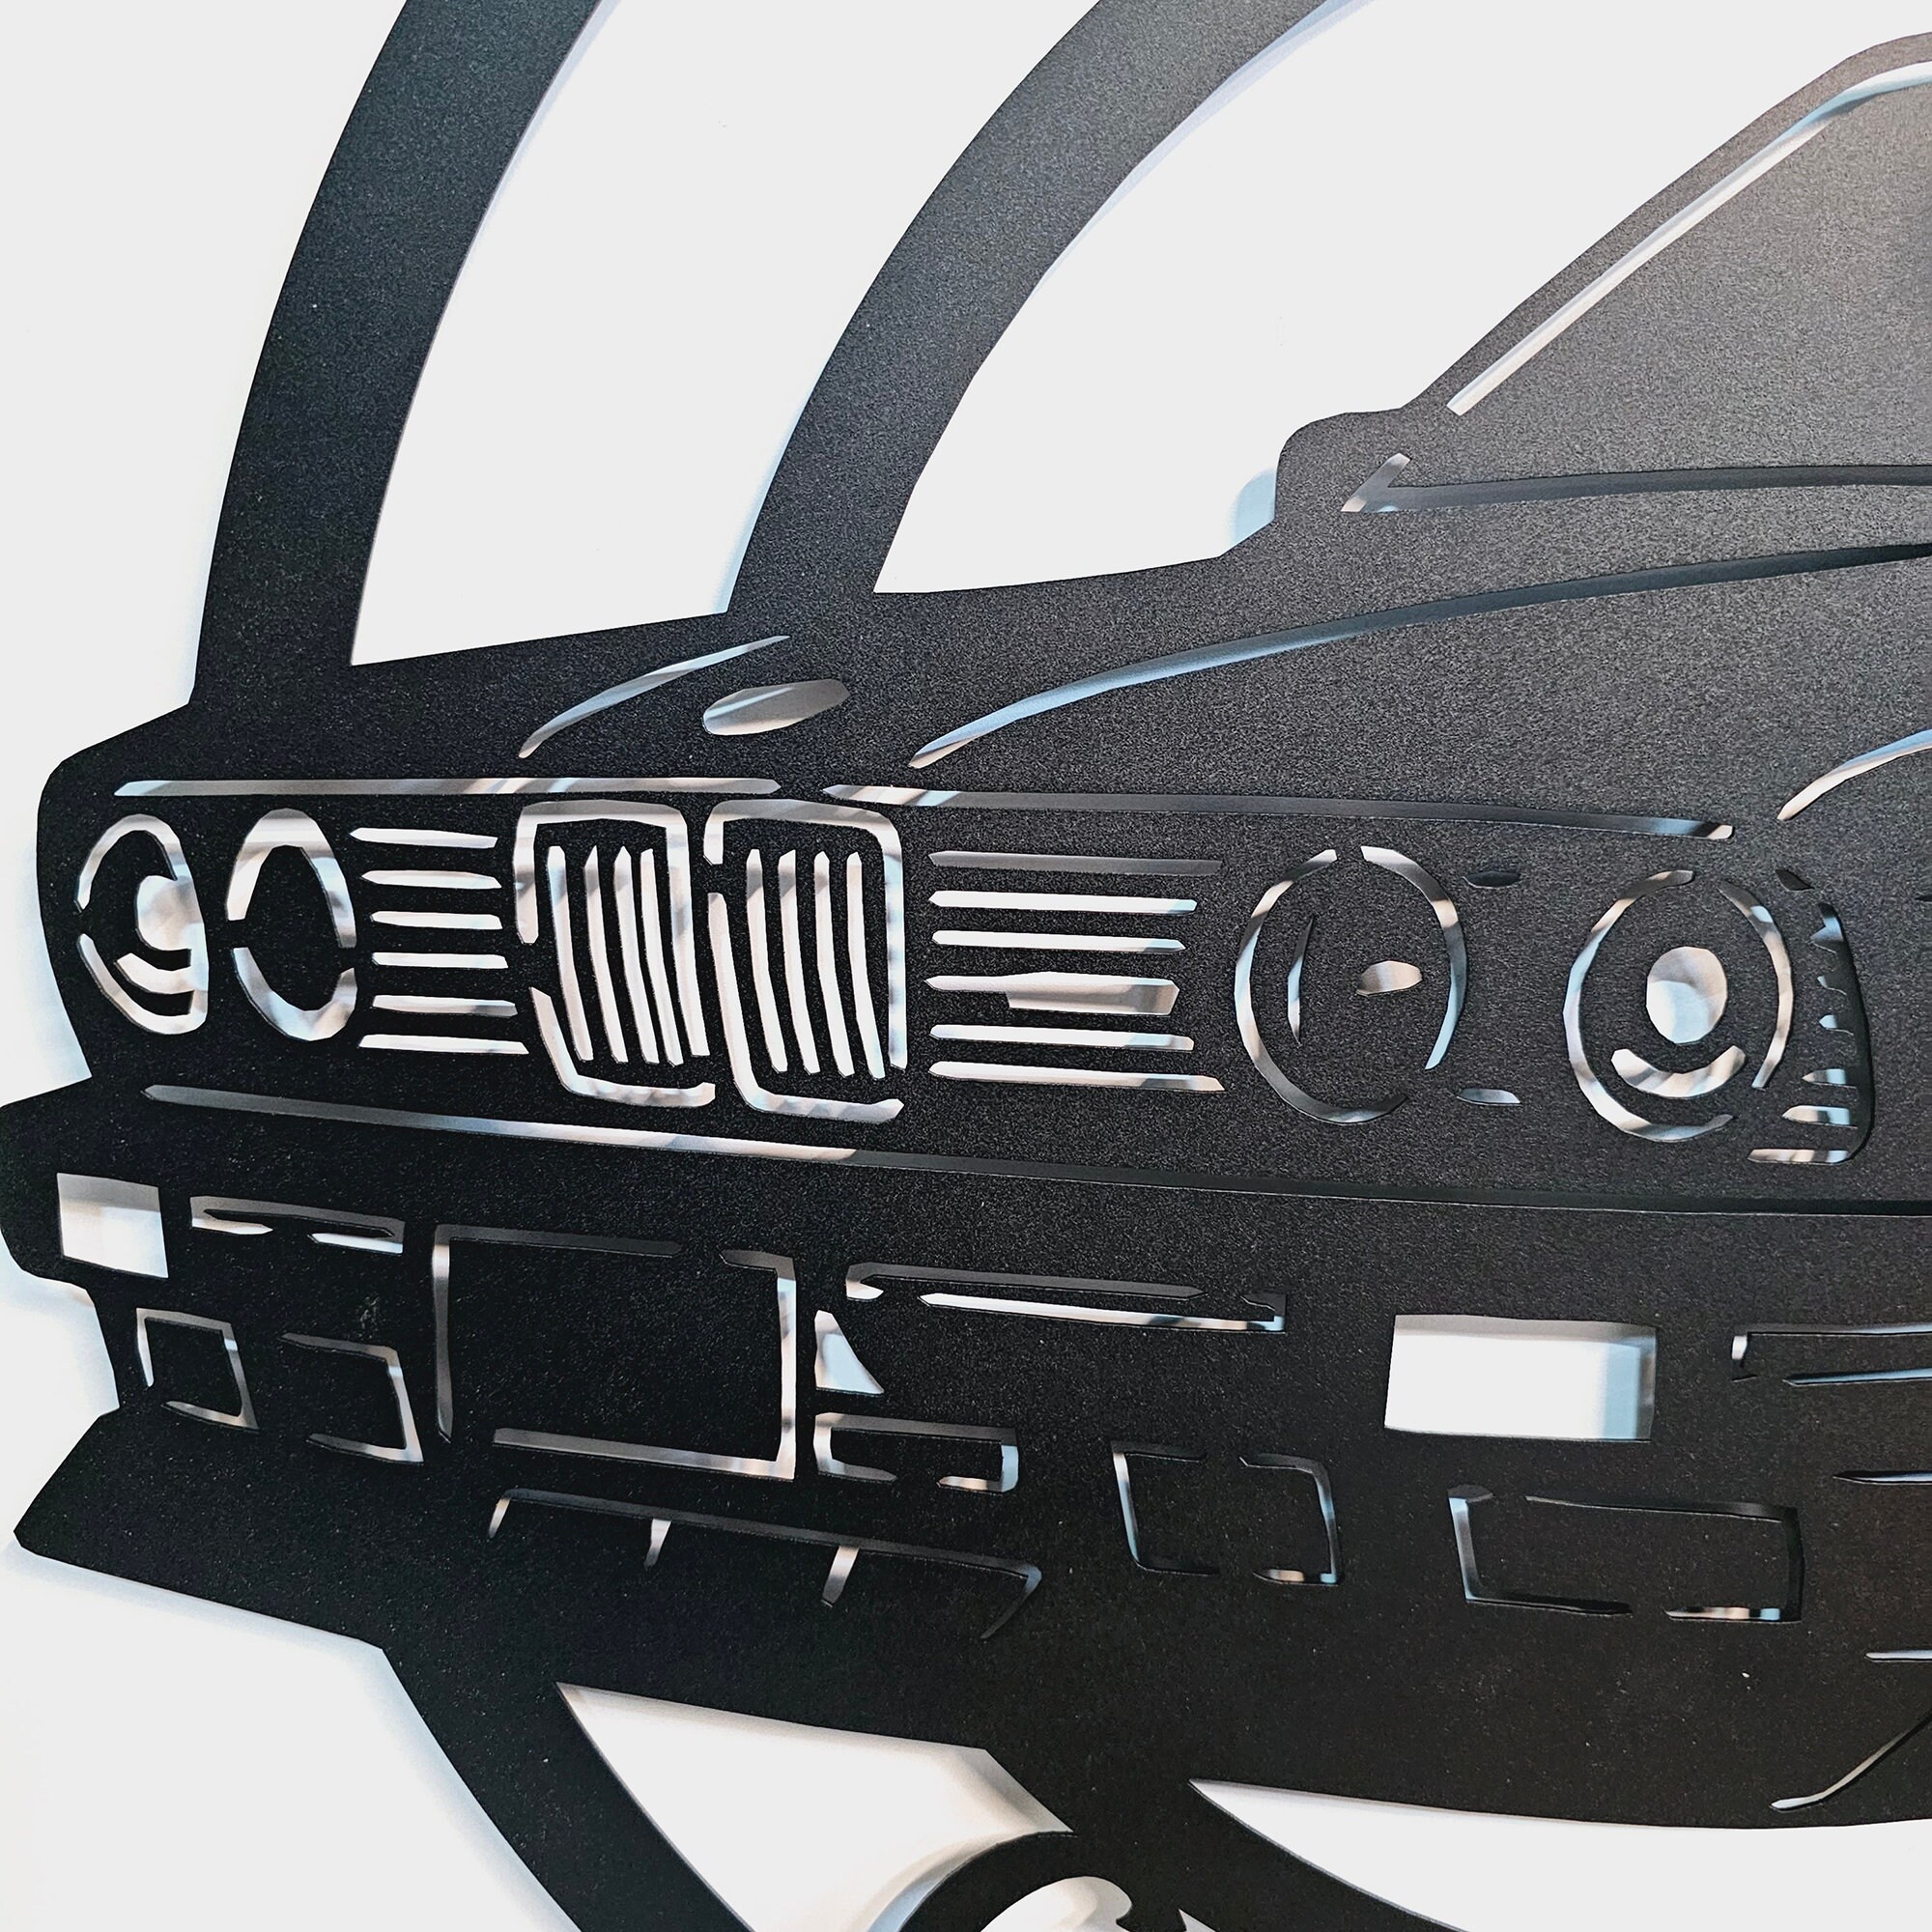 BMW - E30 M Power  Collectible retro metal signs for your wall